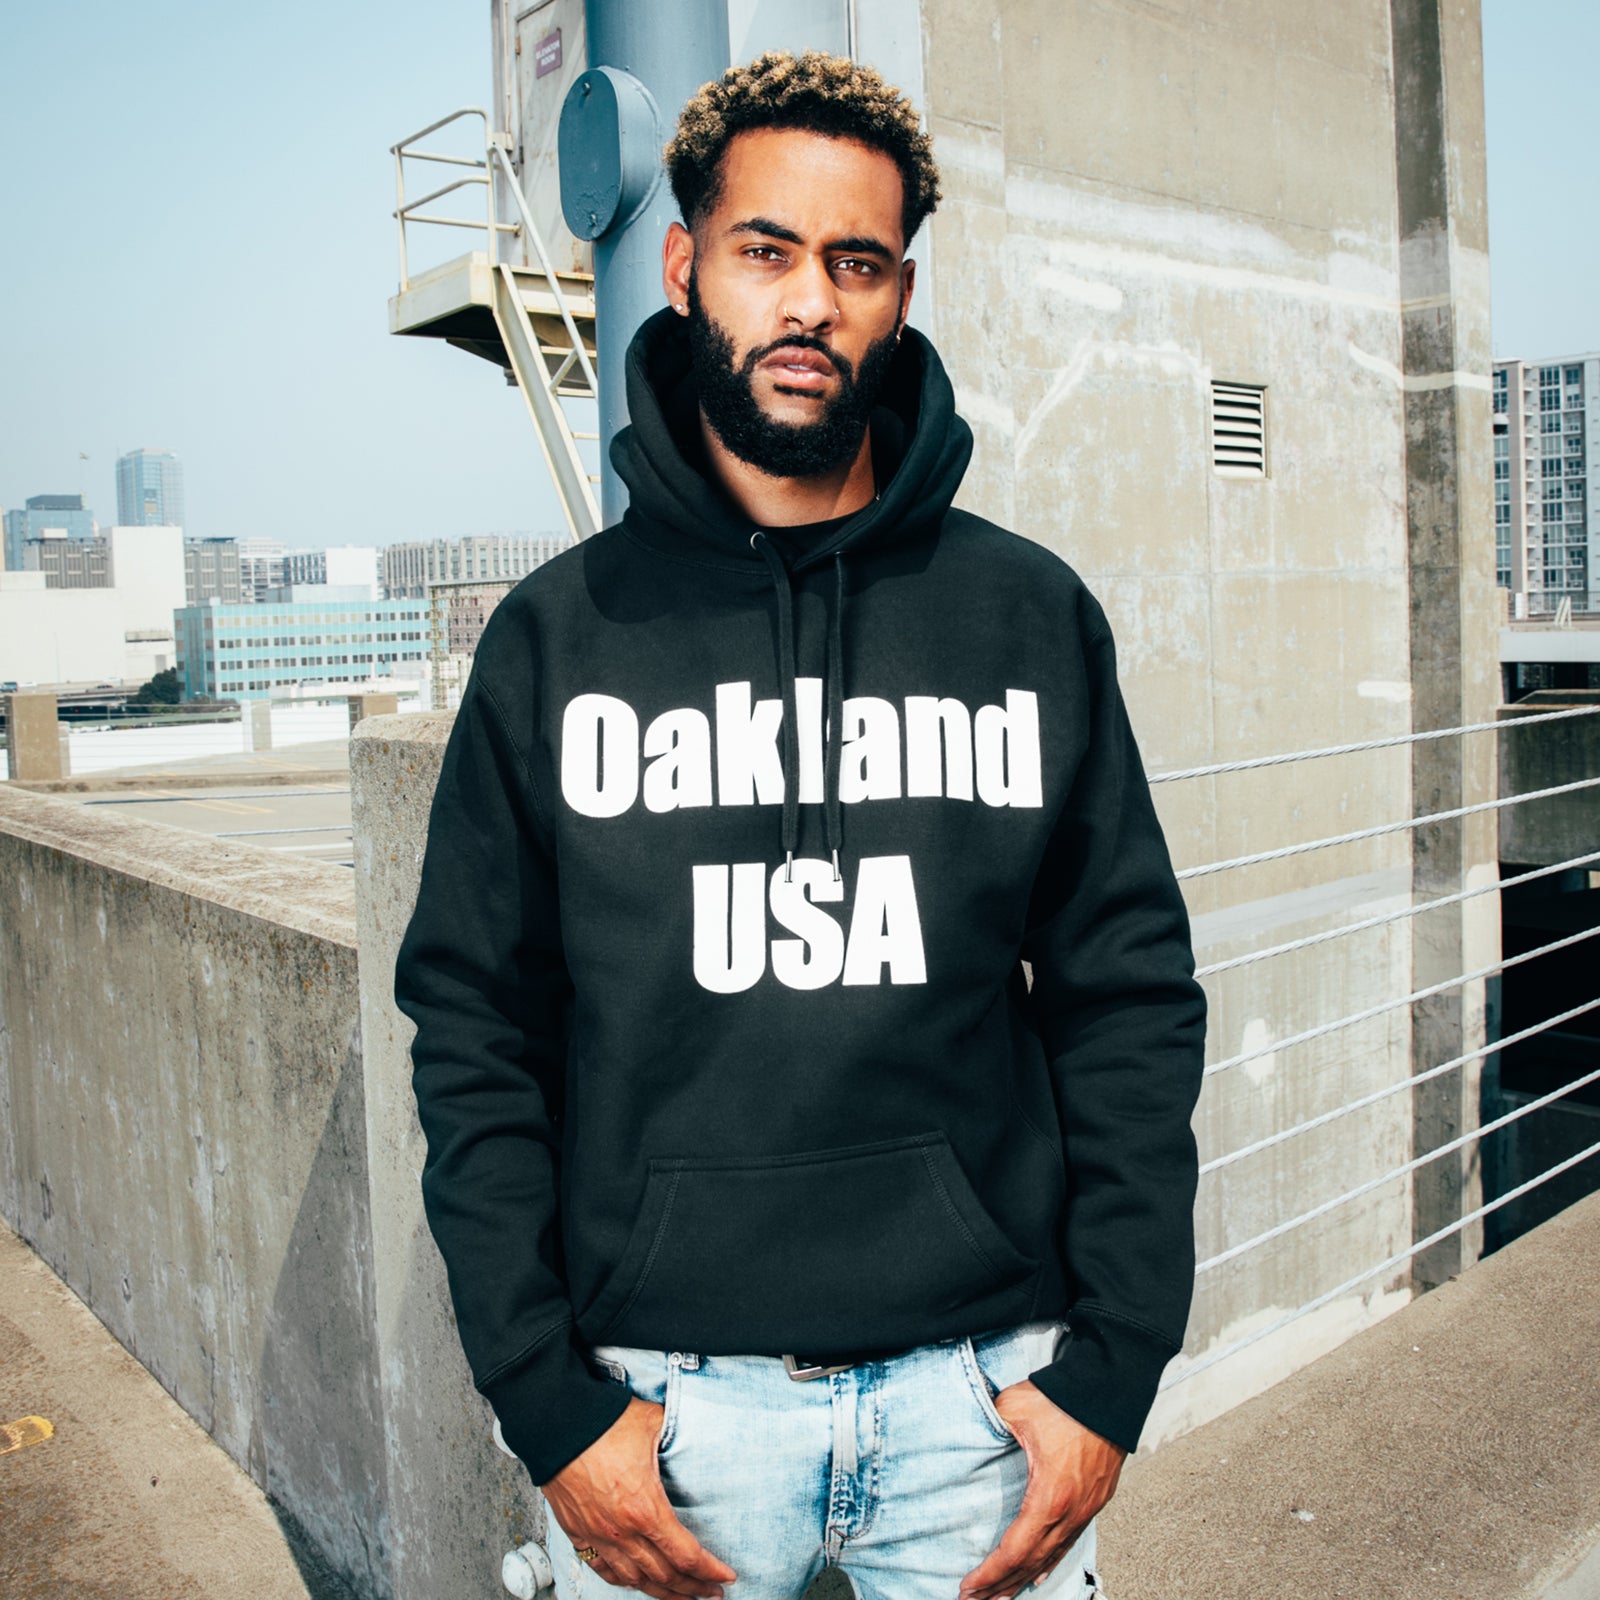 A man standing on an urban rooftop wearing a black hoodie with a white OAKLAND USA wordmark on the chest.